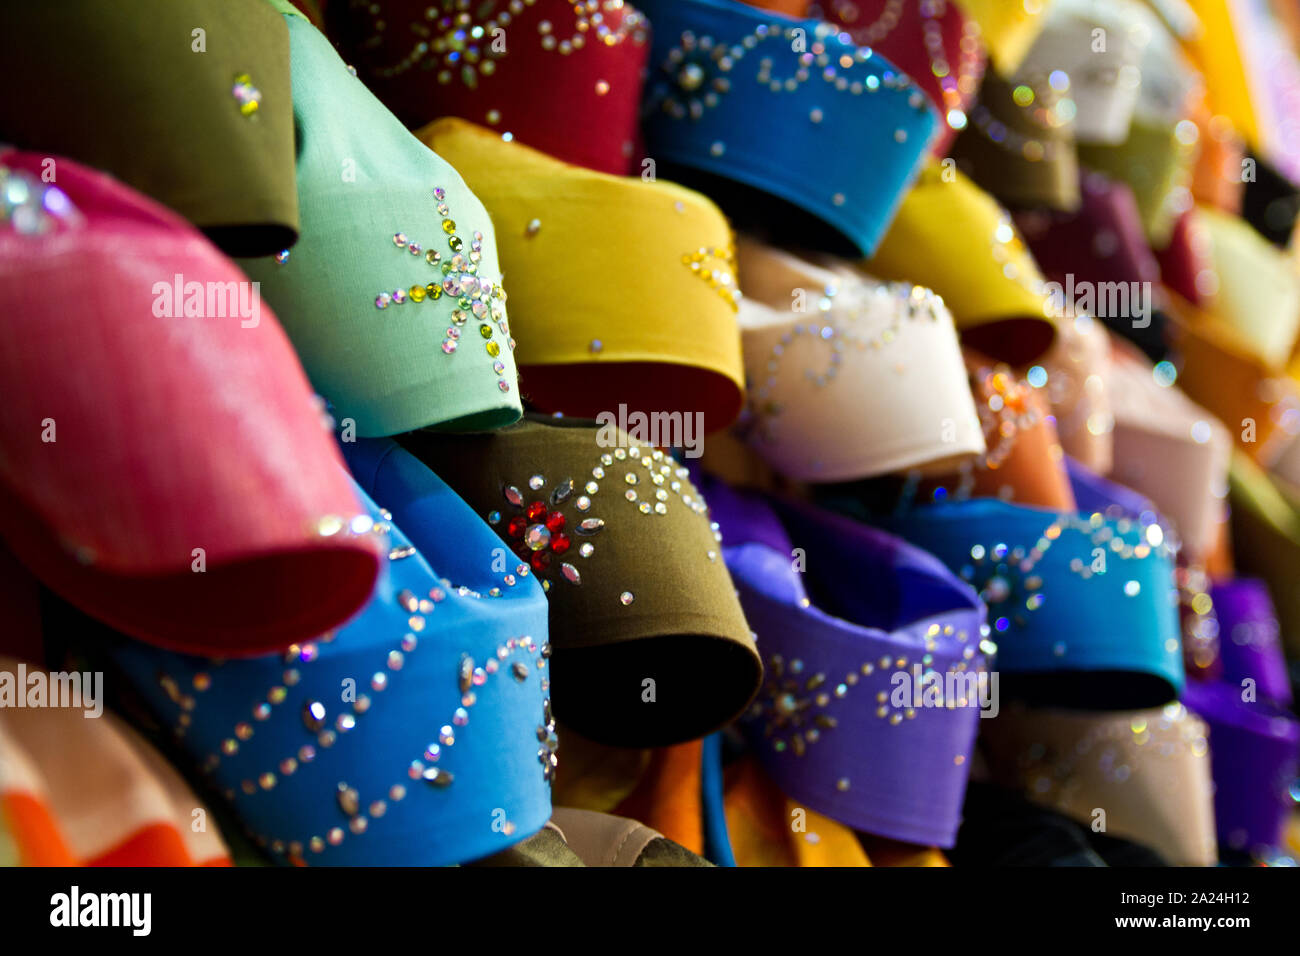 Colorful head cover for muslim women displayed at a shop in Terengganu Malaysia in portrait orientation Stock Photo